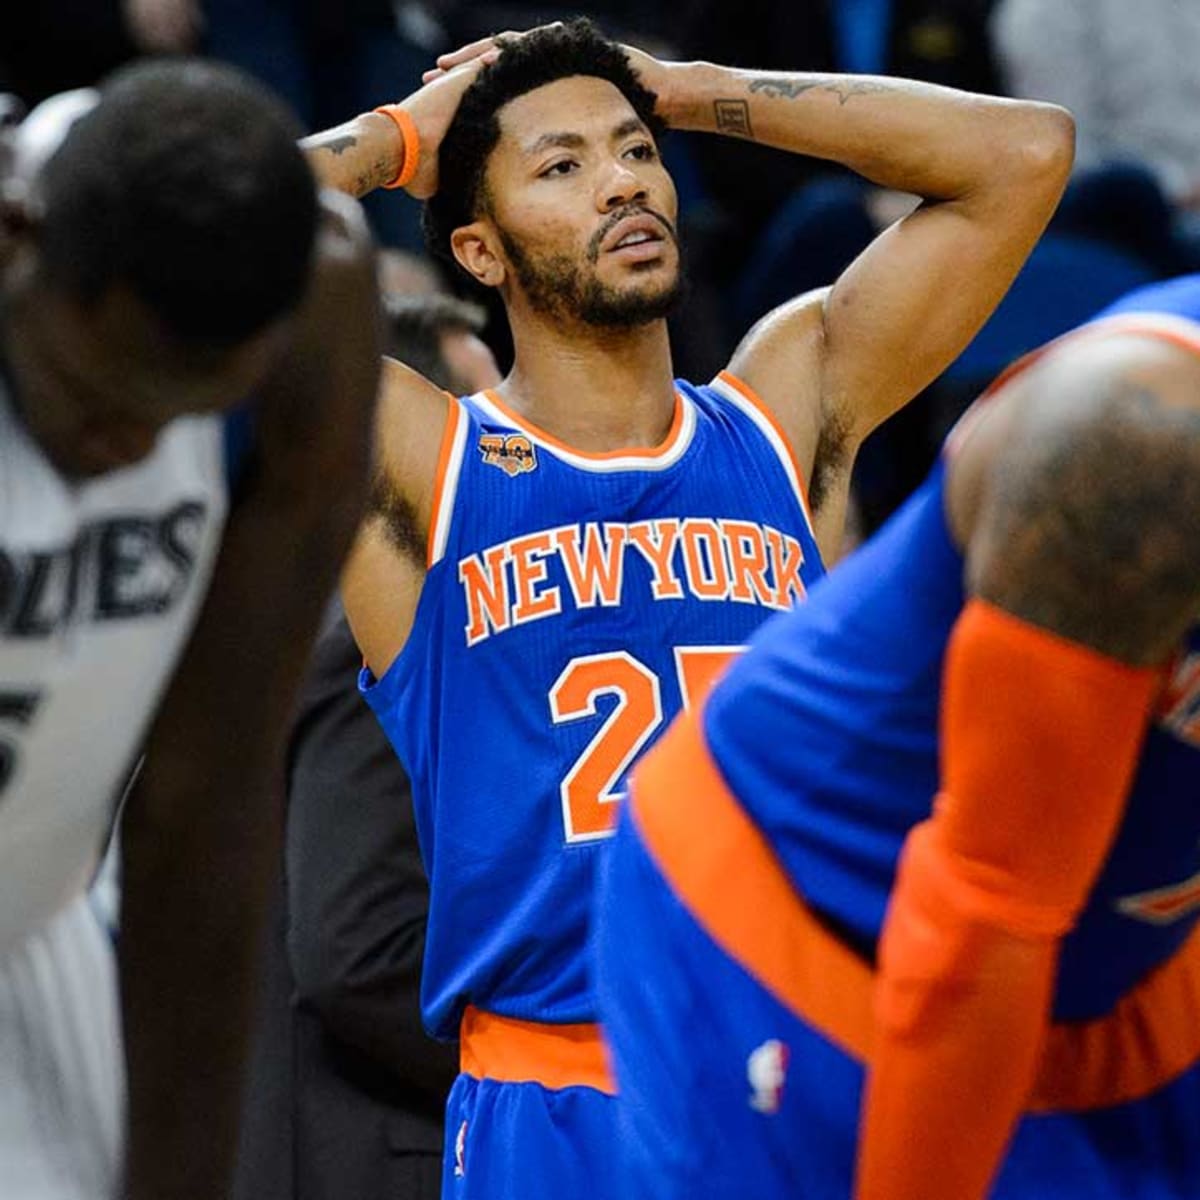 Injured Derrick Rose not with Cavaliers, evaluating his basketball